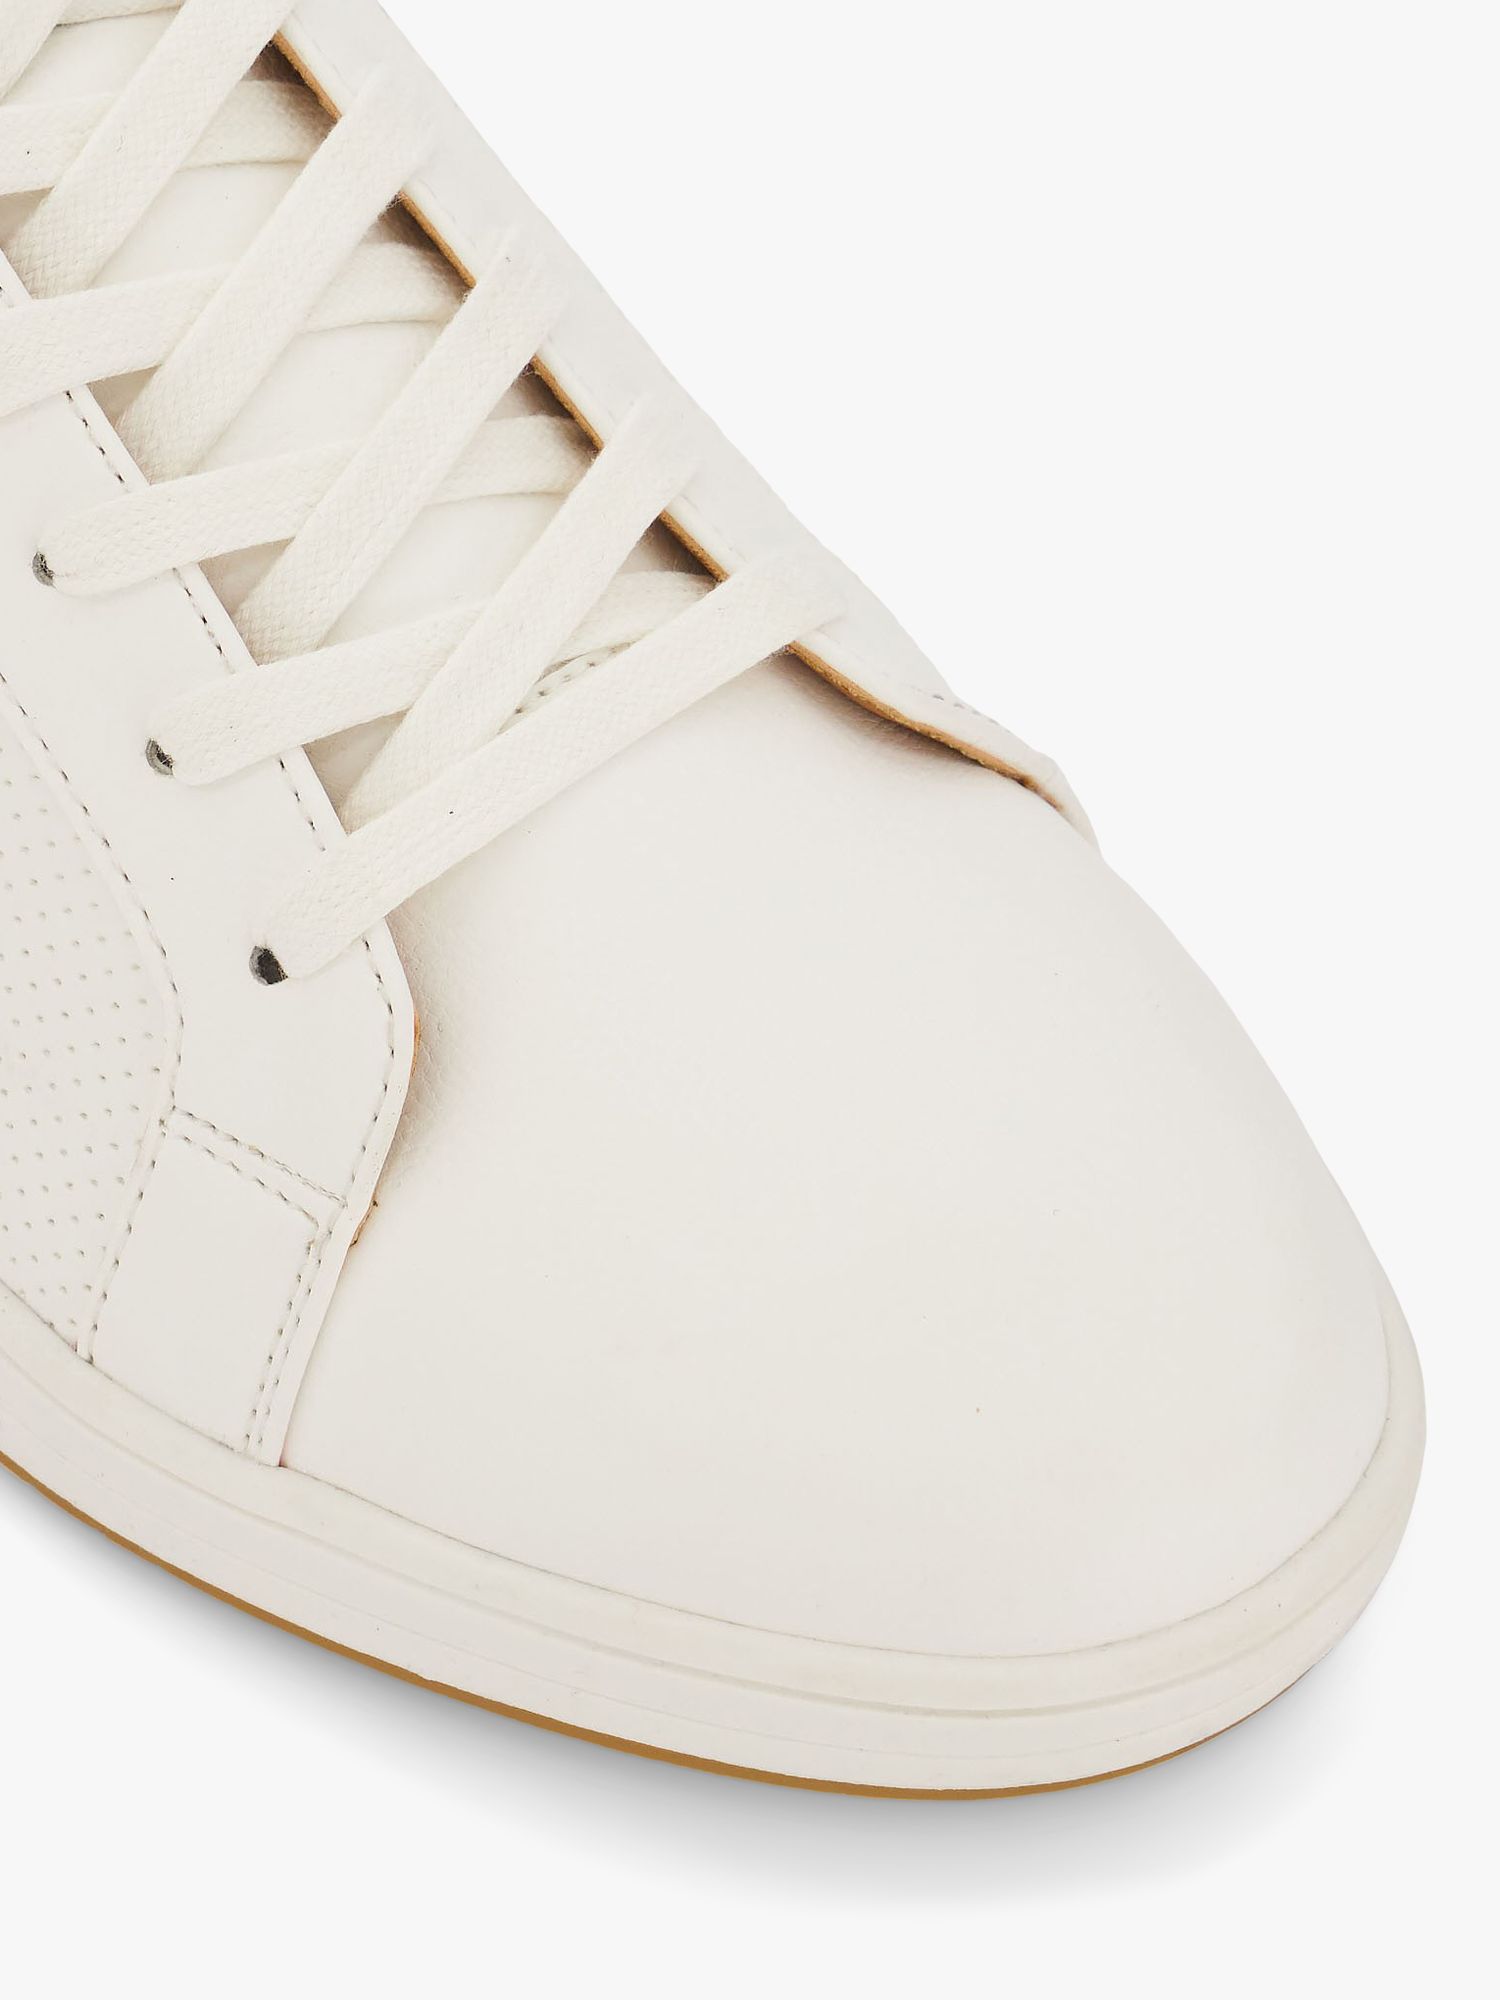 Dune Tezzy Synthetic Shoes, White at John Lewis & Partners